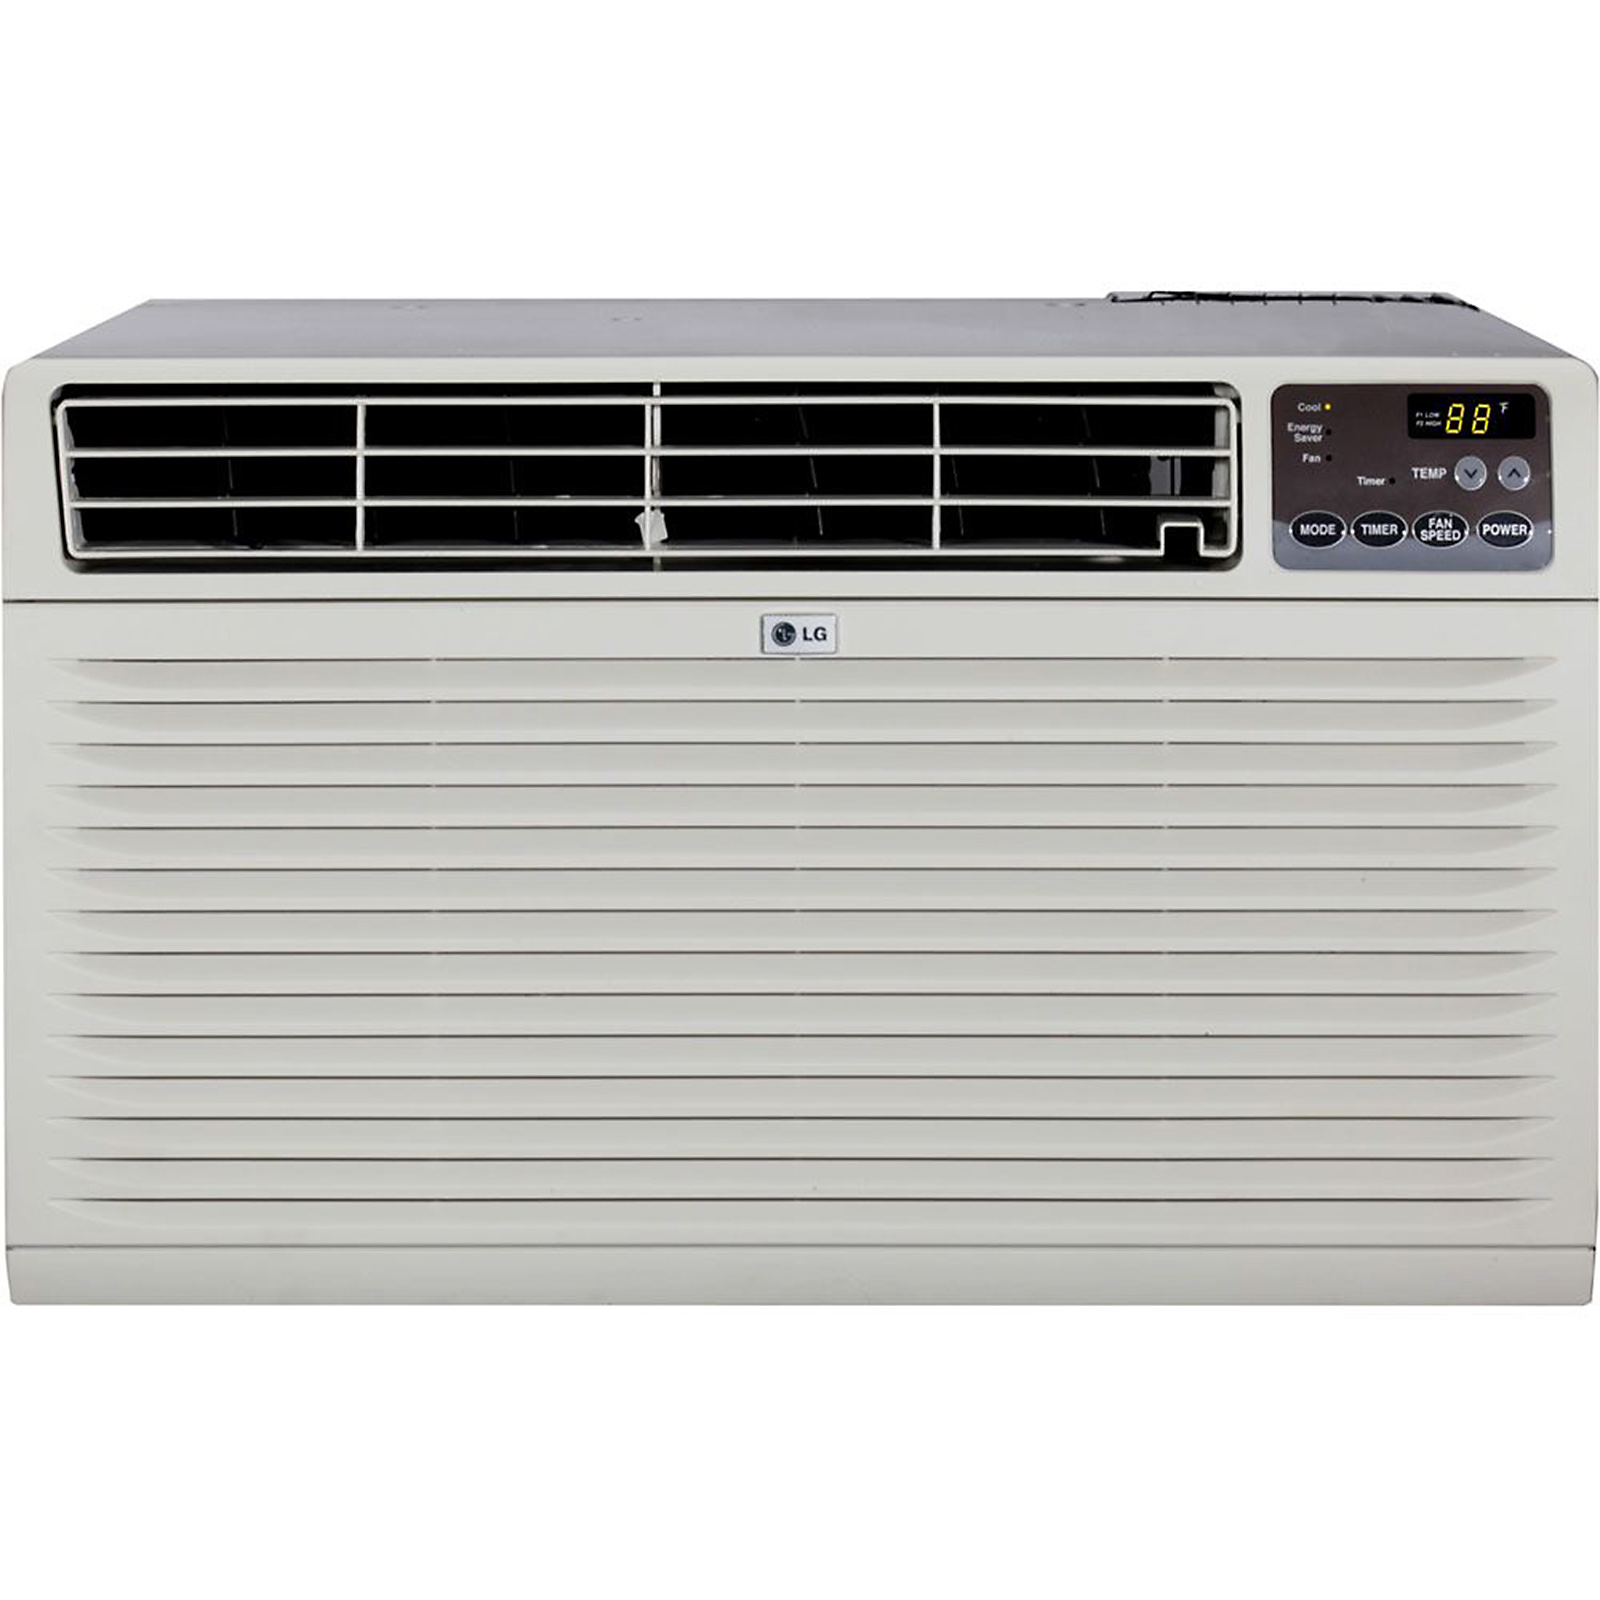 LG 10,000 BTU 230Volt ThroughtheWall Air Conditioner with Remote Control ENERGY STAR